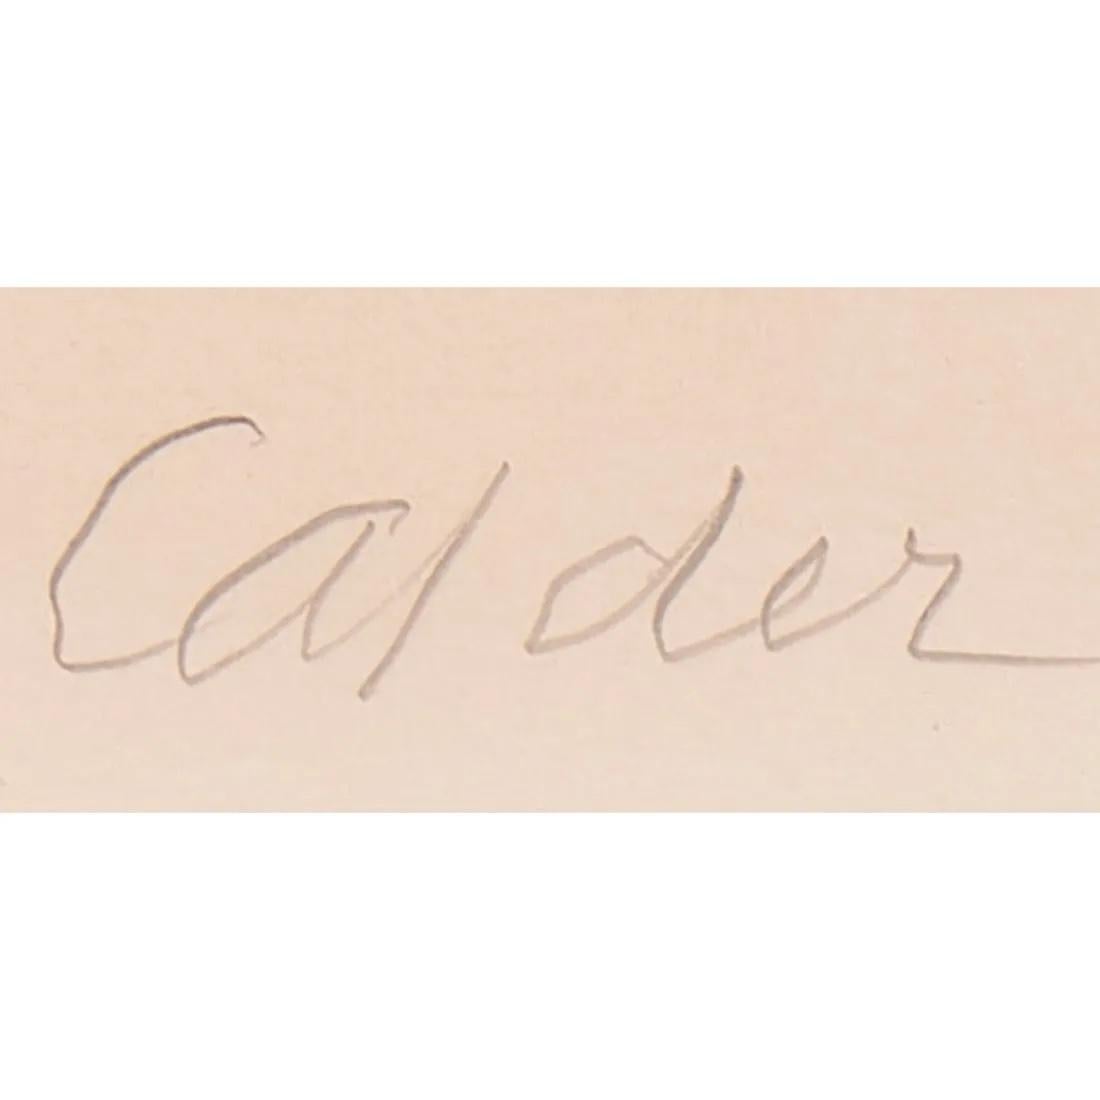 Alexander Calder (1898-1976, American )
The Black Line
1967
Lithograph
22 1/2 x 30 1/8 in.
Edition of 60
Pencil signed and numbered

Alexander Calder (July 22, 1898 – November 11, 1976) was an American sculptor known both for his innovative mobiles